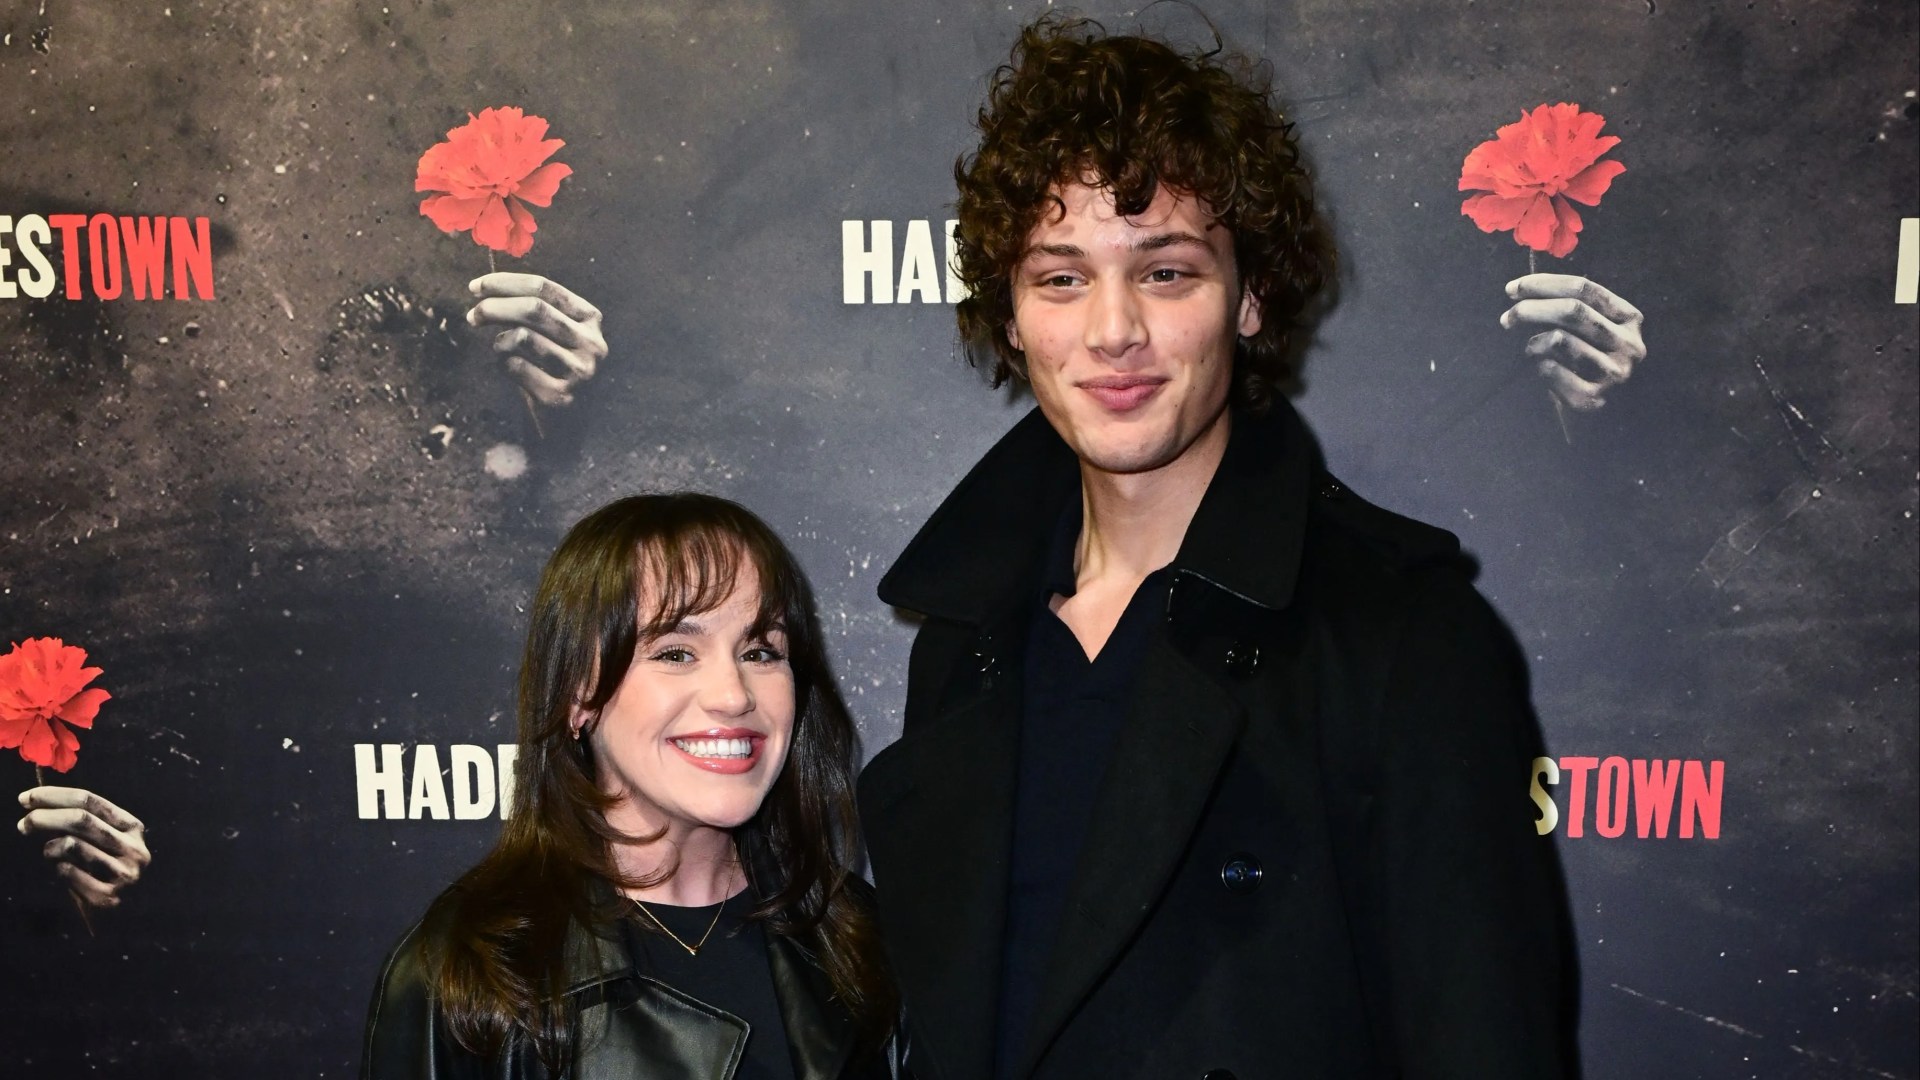 Ellie Leach Throws Shade at Bobby Brazier in Mysterious Post While Reuniting with Vito Coppola – Juicy Celebrity Drama Revealed!